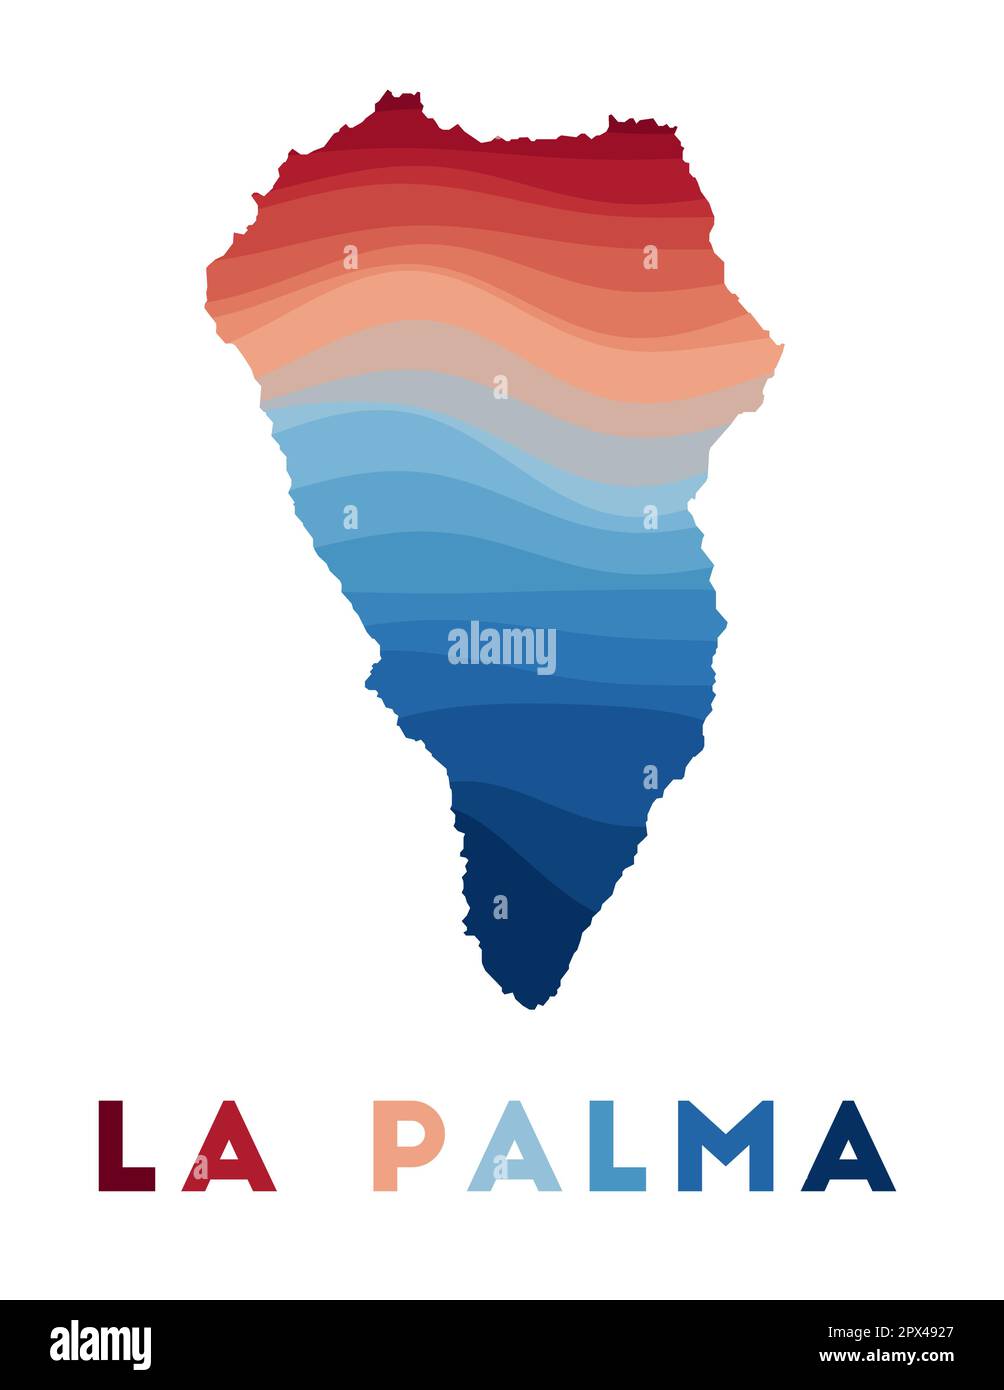 La Palma map. Map of the island with beautiful geometric waves in red blue colors. Vivid La Palma shape. Vector illustration. Stock Vector